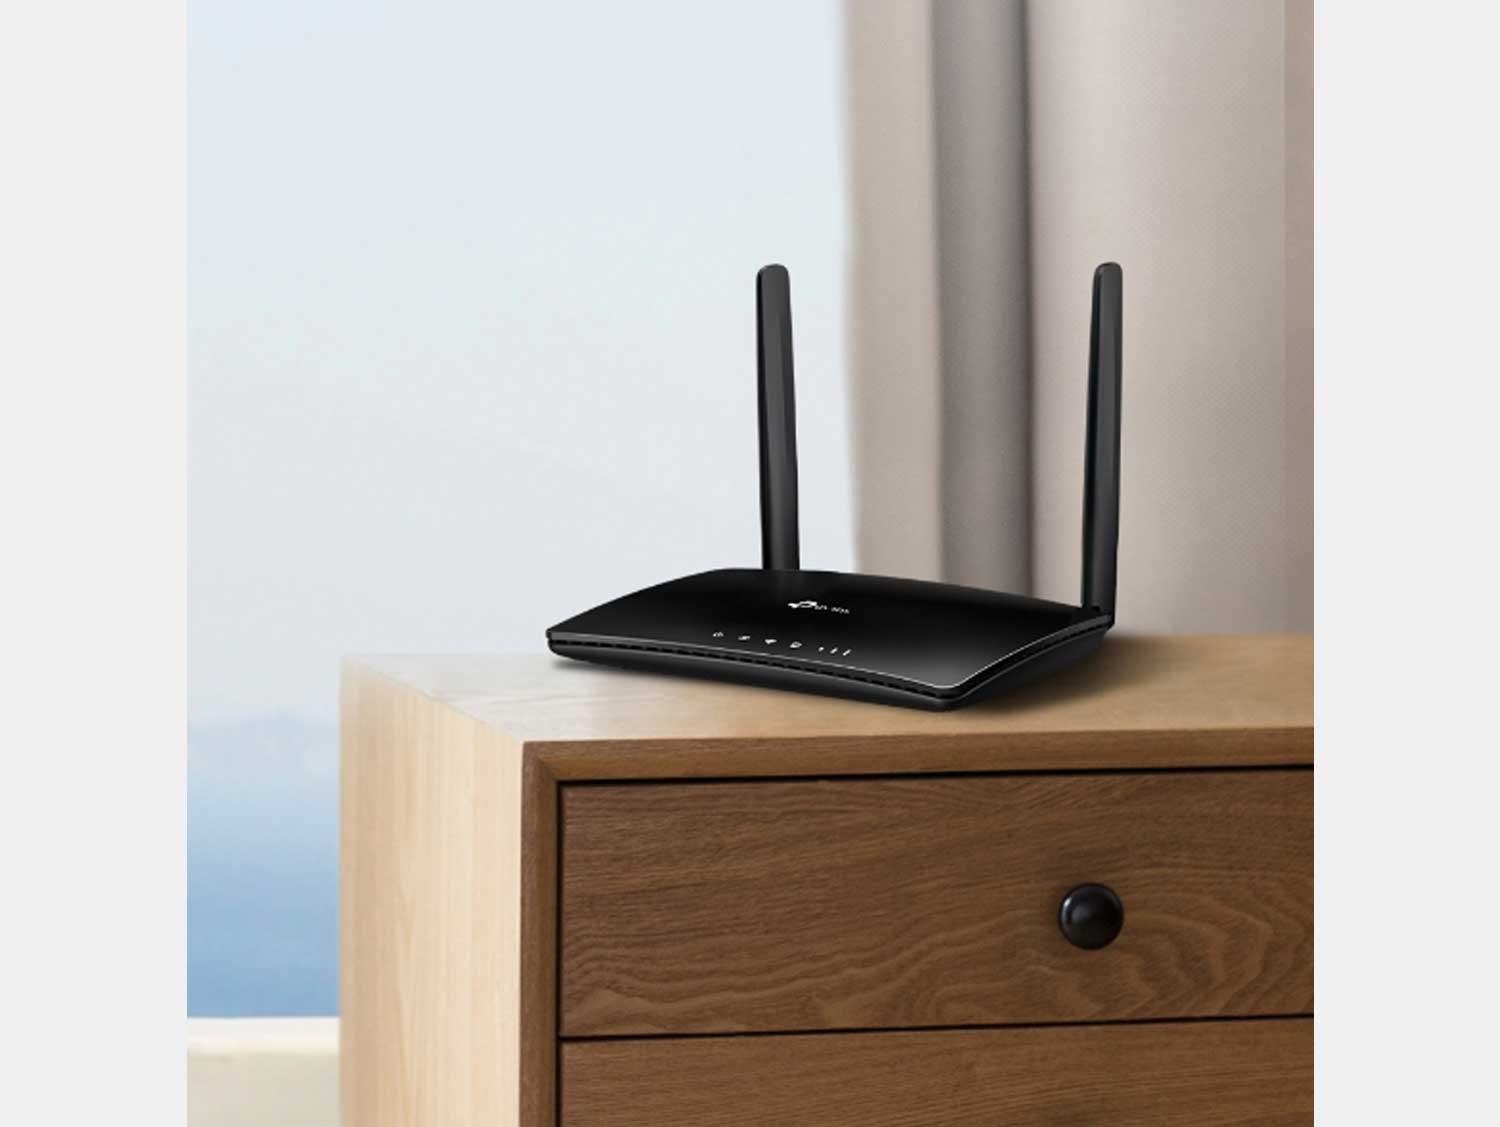 Tp-Link TL-MR6400 | 300 Mbps Wireless 4G LTE Router